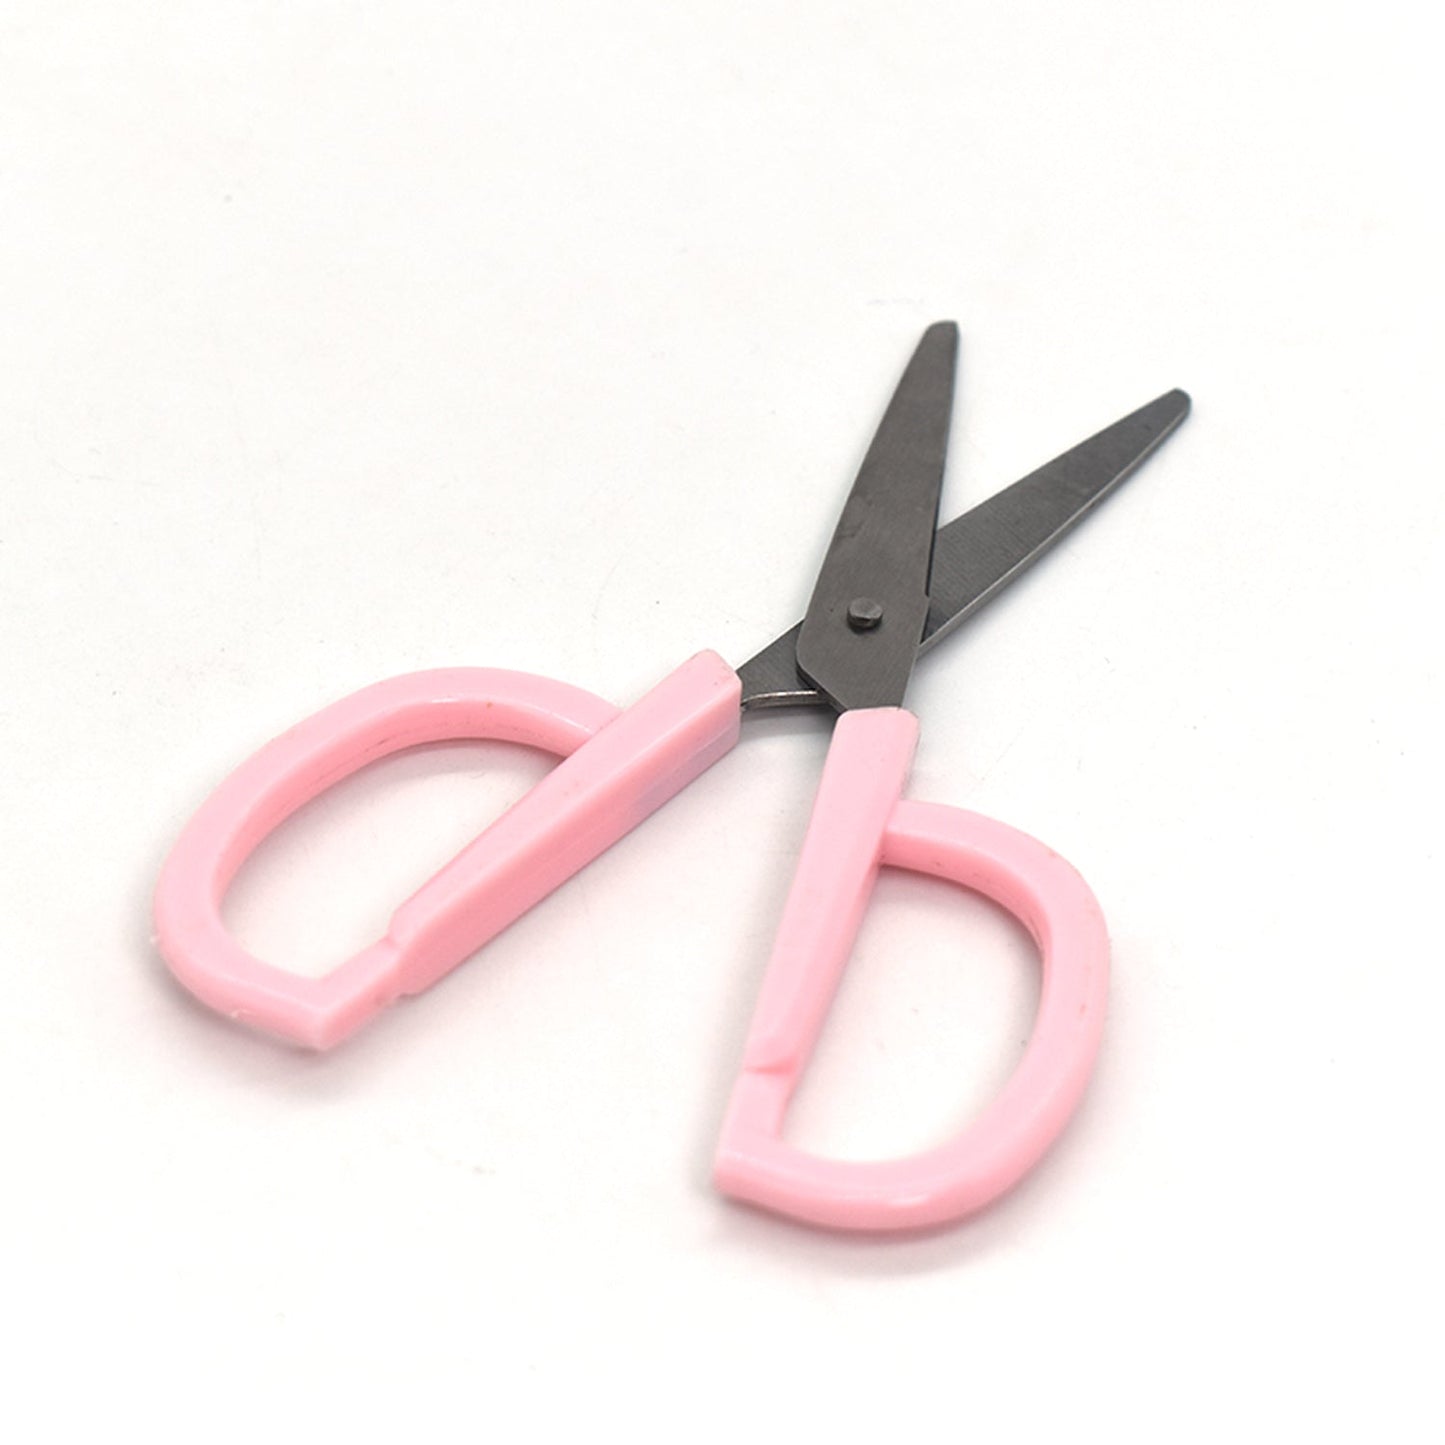 7441 Multipurpose Scissors Comfort Grip Handles Used in Home and Office - SWASTIK CREATIONS The Trend Point SWASTIK CREATIONS The Trend Point